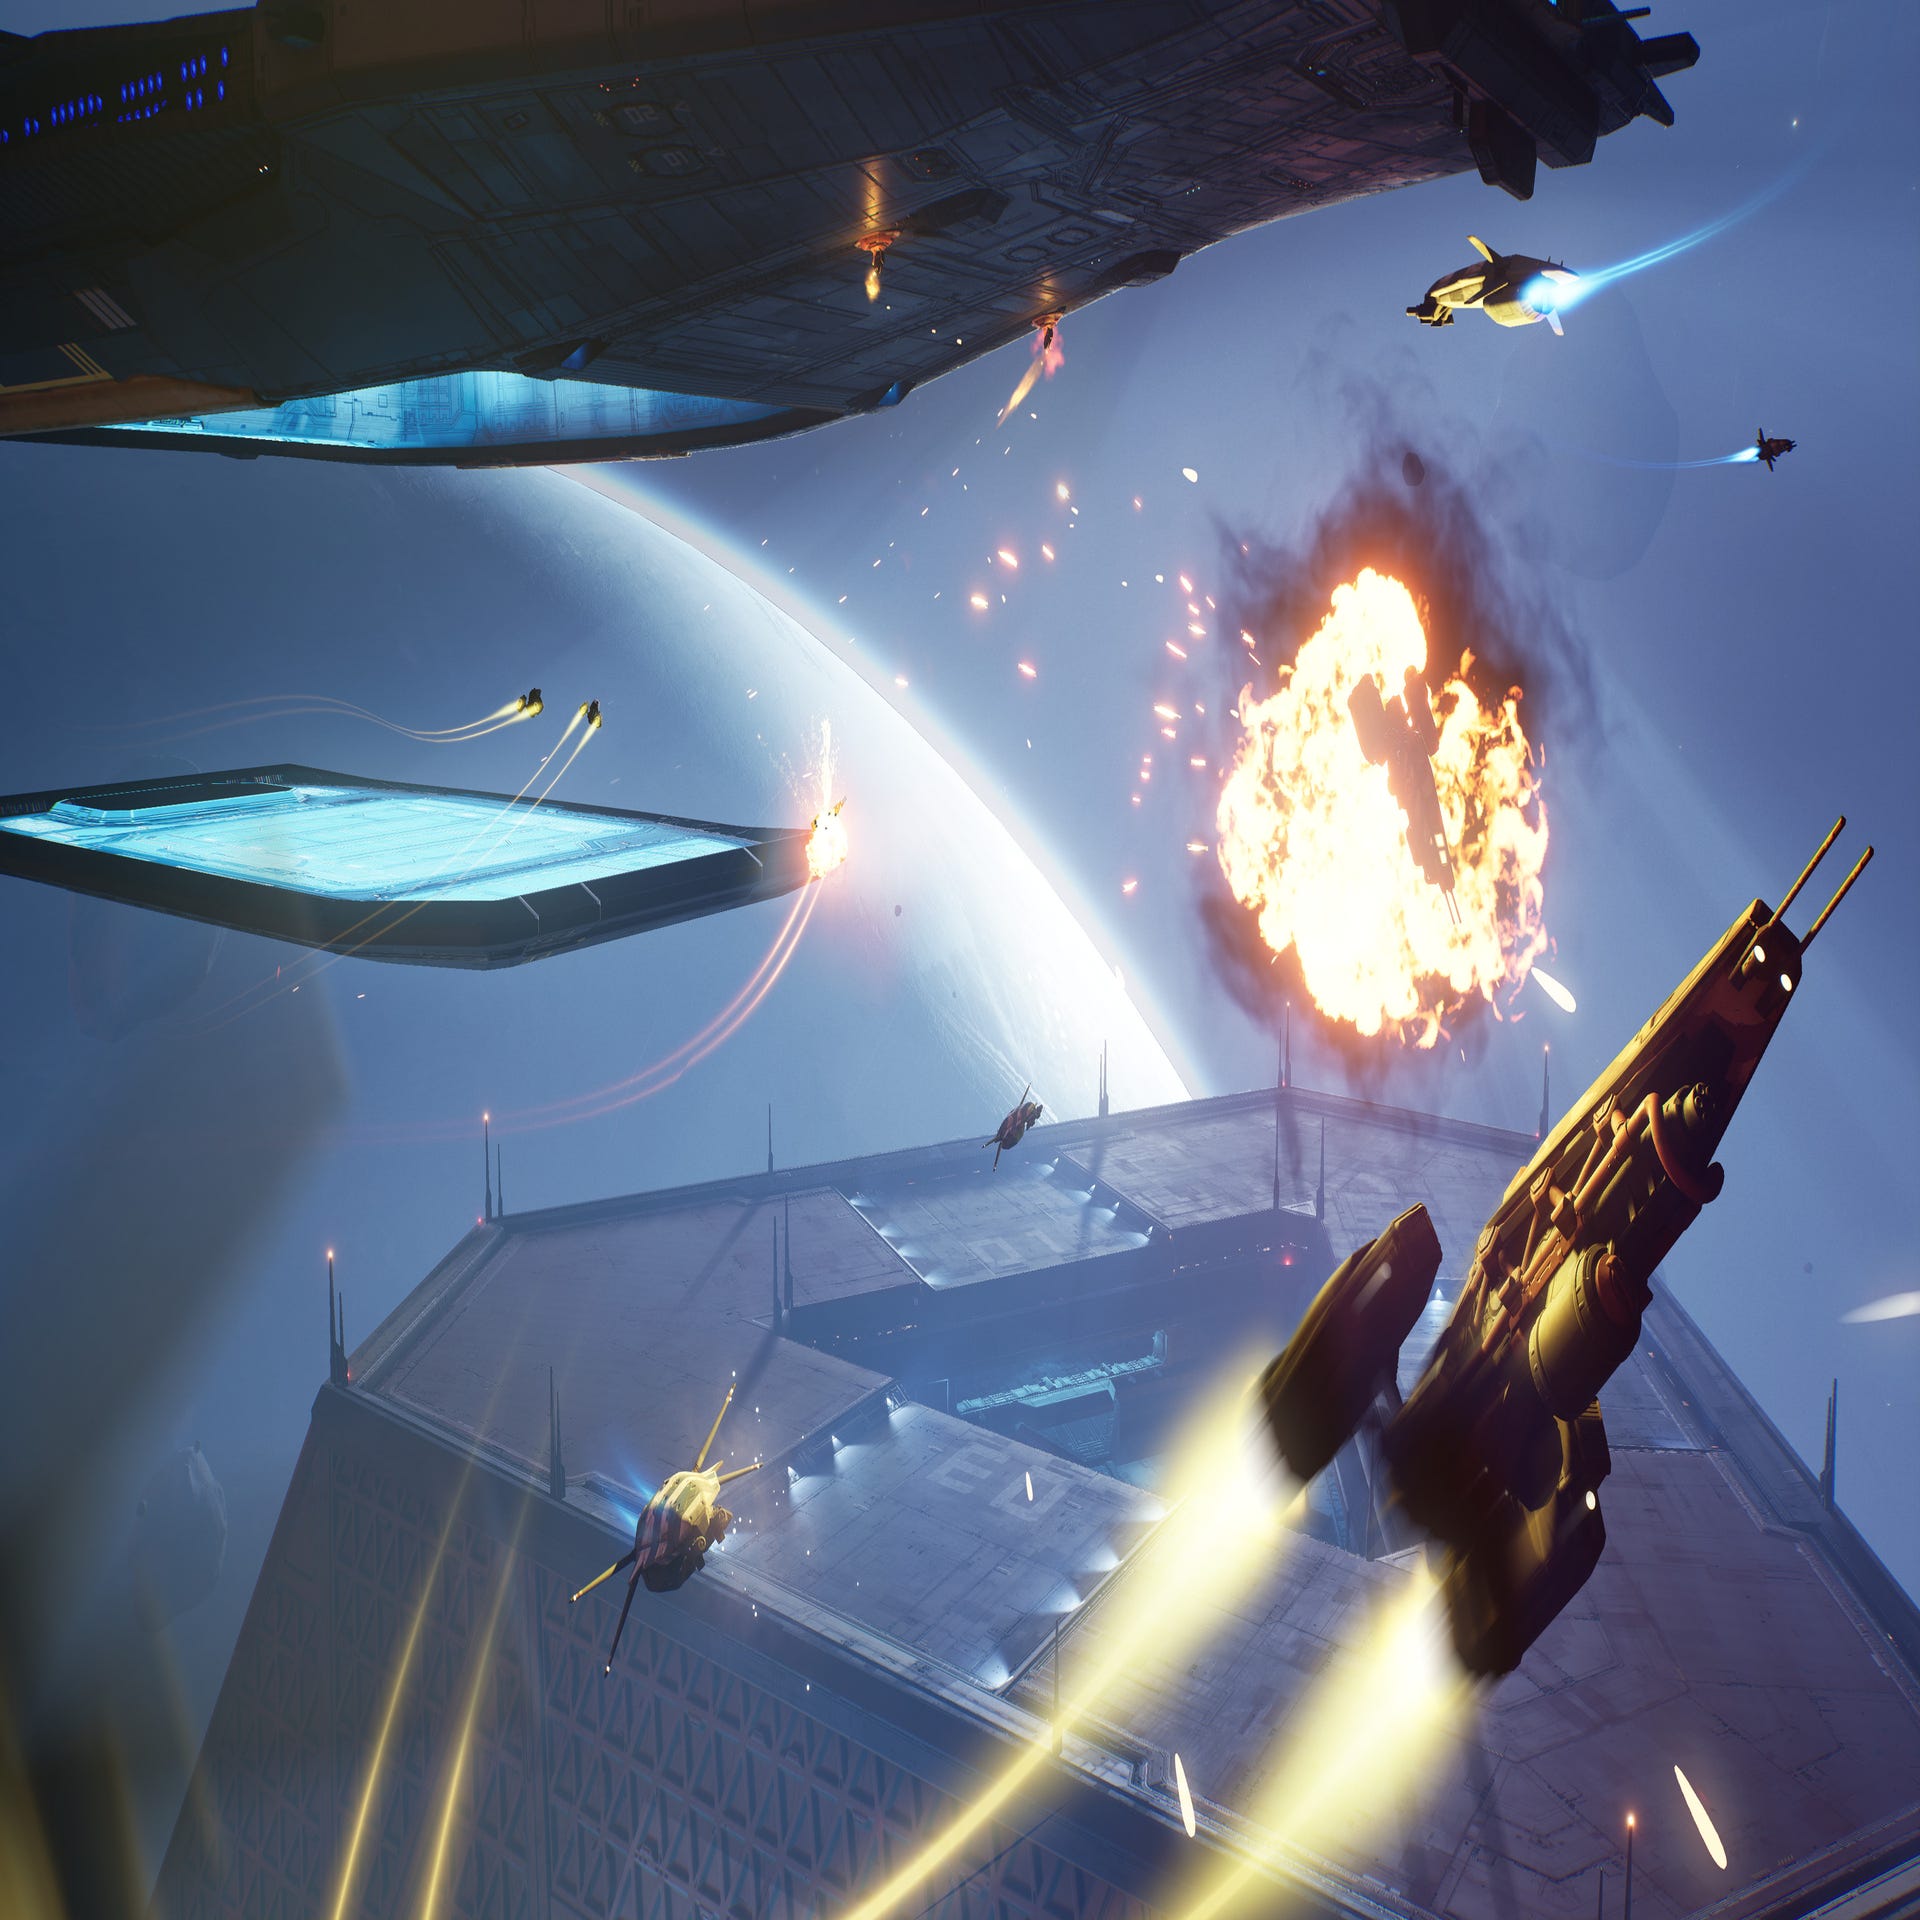 Here's how the Homeworld 3 devs are improving the game after delaying release over demo feedback